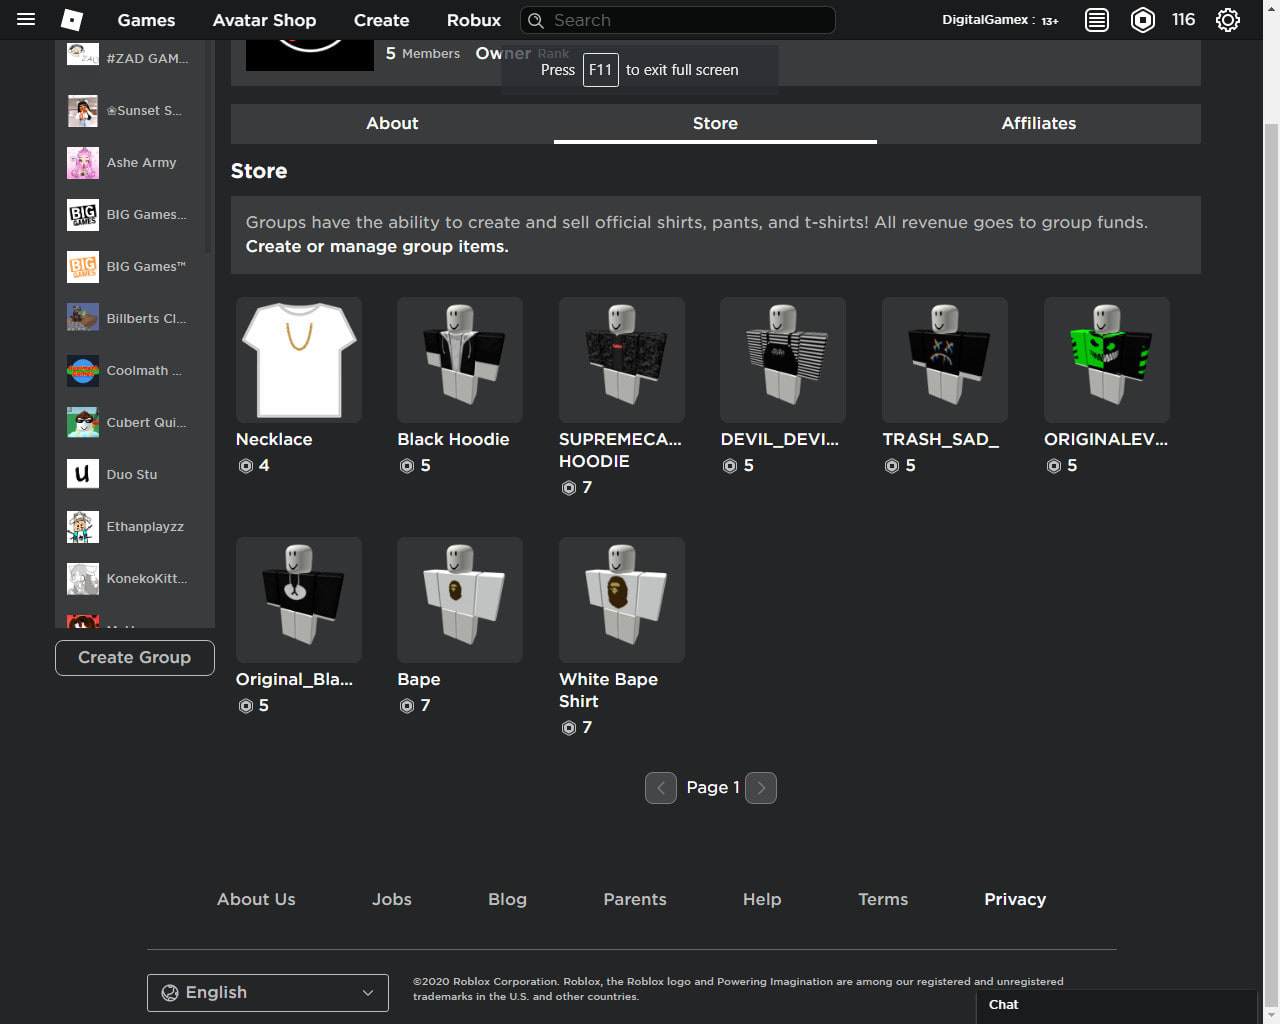 Add Clothes To Your Group By Digitalgamex Fiverr - how to add games to your group roblox 2020